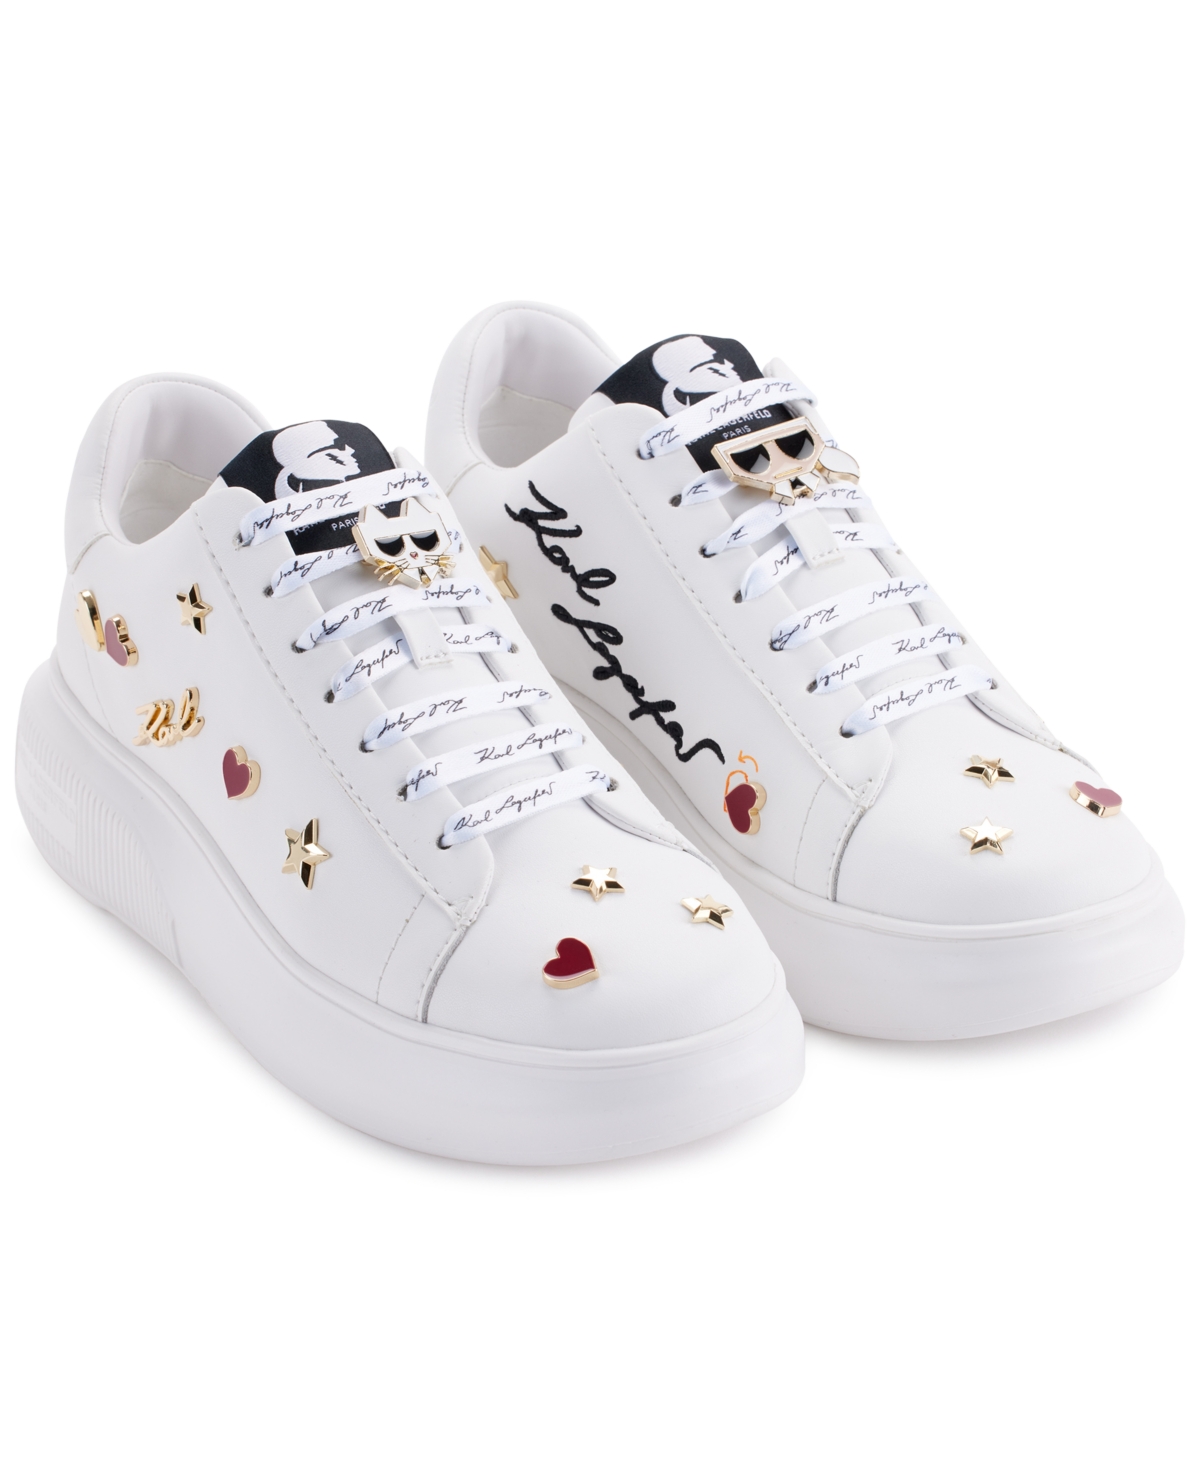 Karl Lagerfeld Kenna Lace-up Low-top Embellished Sneakers In Bright White